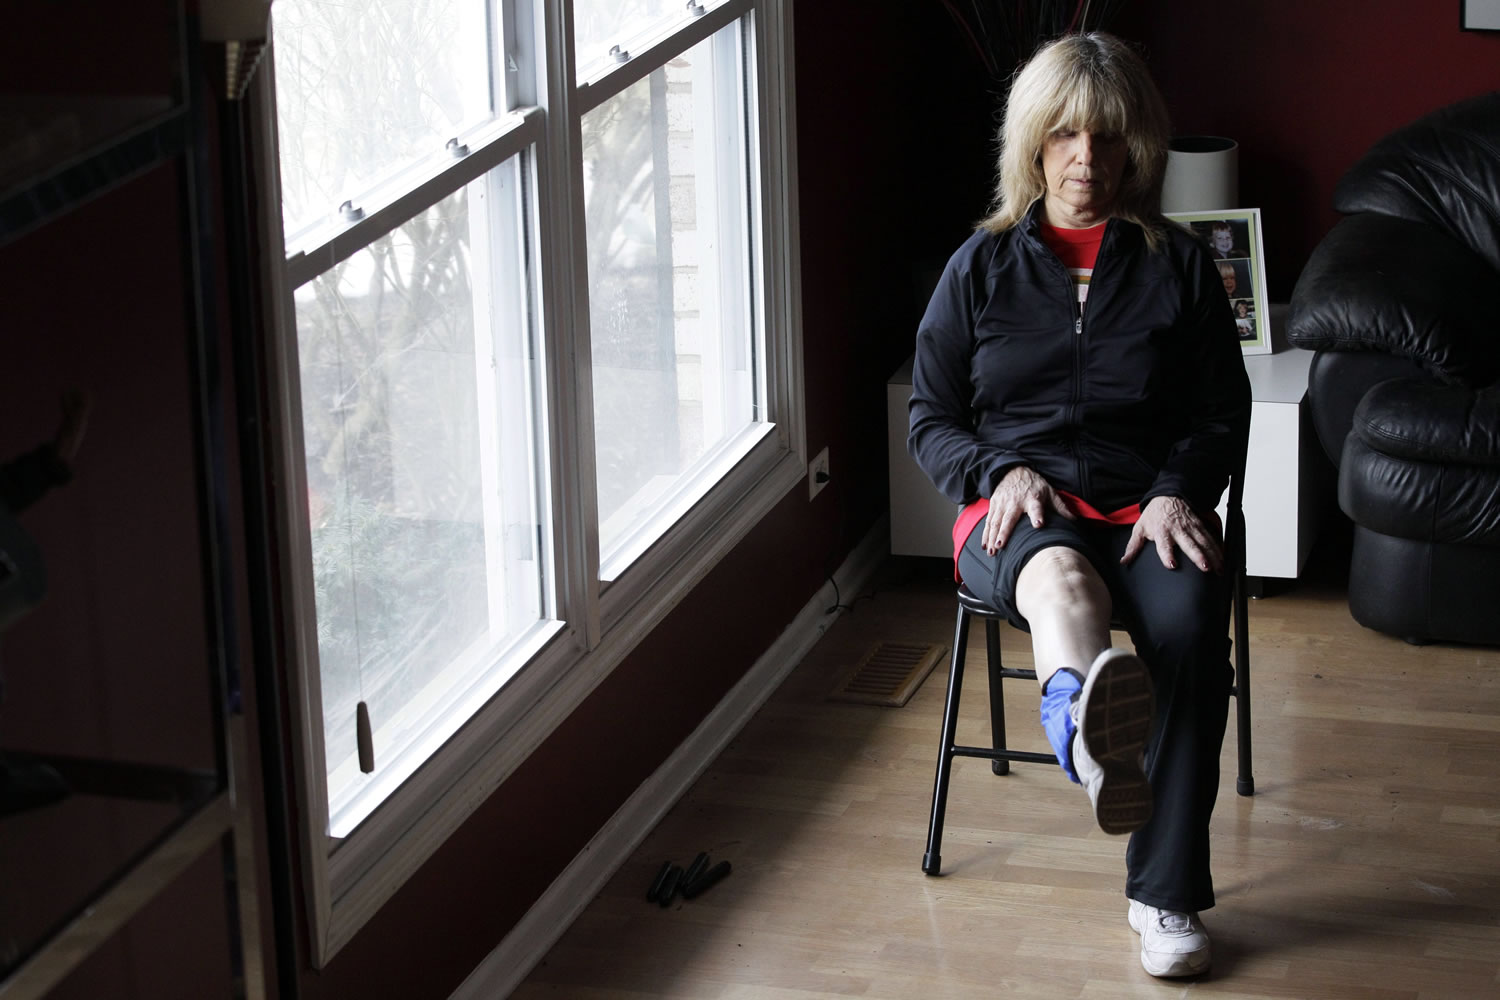 In this Feb. 4, 2012 photo, Donna Brent, 63, works out her leg at her home in Deerfield, Ill. Brent says decades of racket ball, tennis, softball and other sports took a toll on her knees, but she got used to living with the pain, even when she became bowlegged and developed a limp. When pain started getting in the way of some of her sports, she gave in to her doctor's advice and had a knee replacement operation last June on her right knee. Nearly 1 in 20 Americans older than 50 have bionic knees, or more than 4 million people, according to the first national estimate showing how common these replacement joints have become in an aging population. (AP Photo/Nam Y.